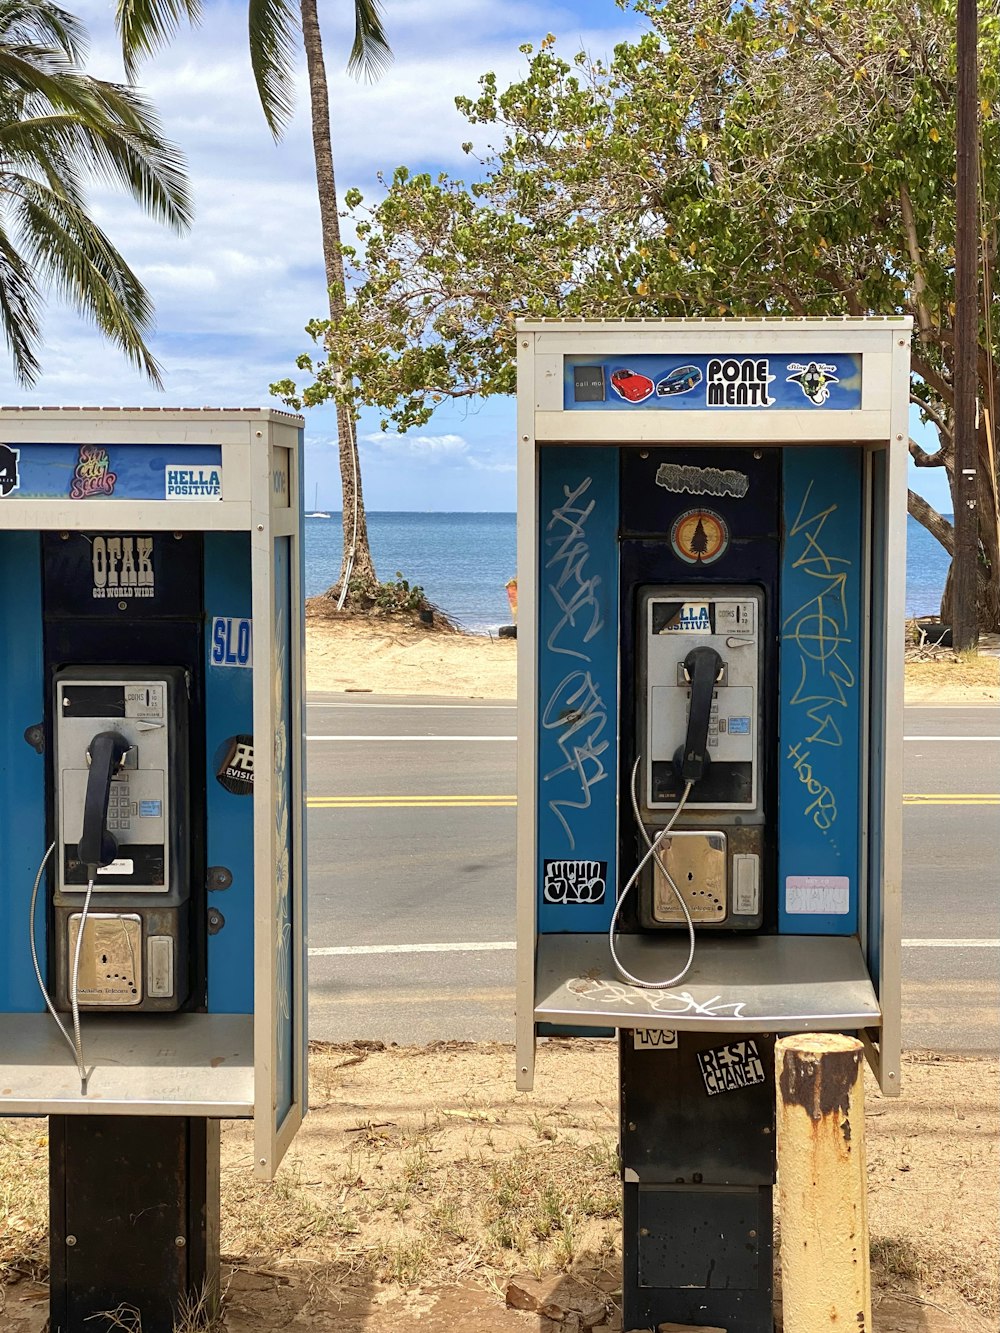 two old style pay phones sitting on the side of the road